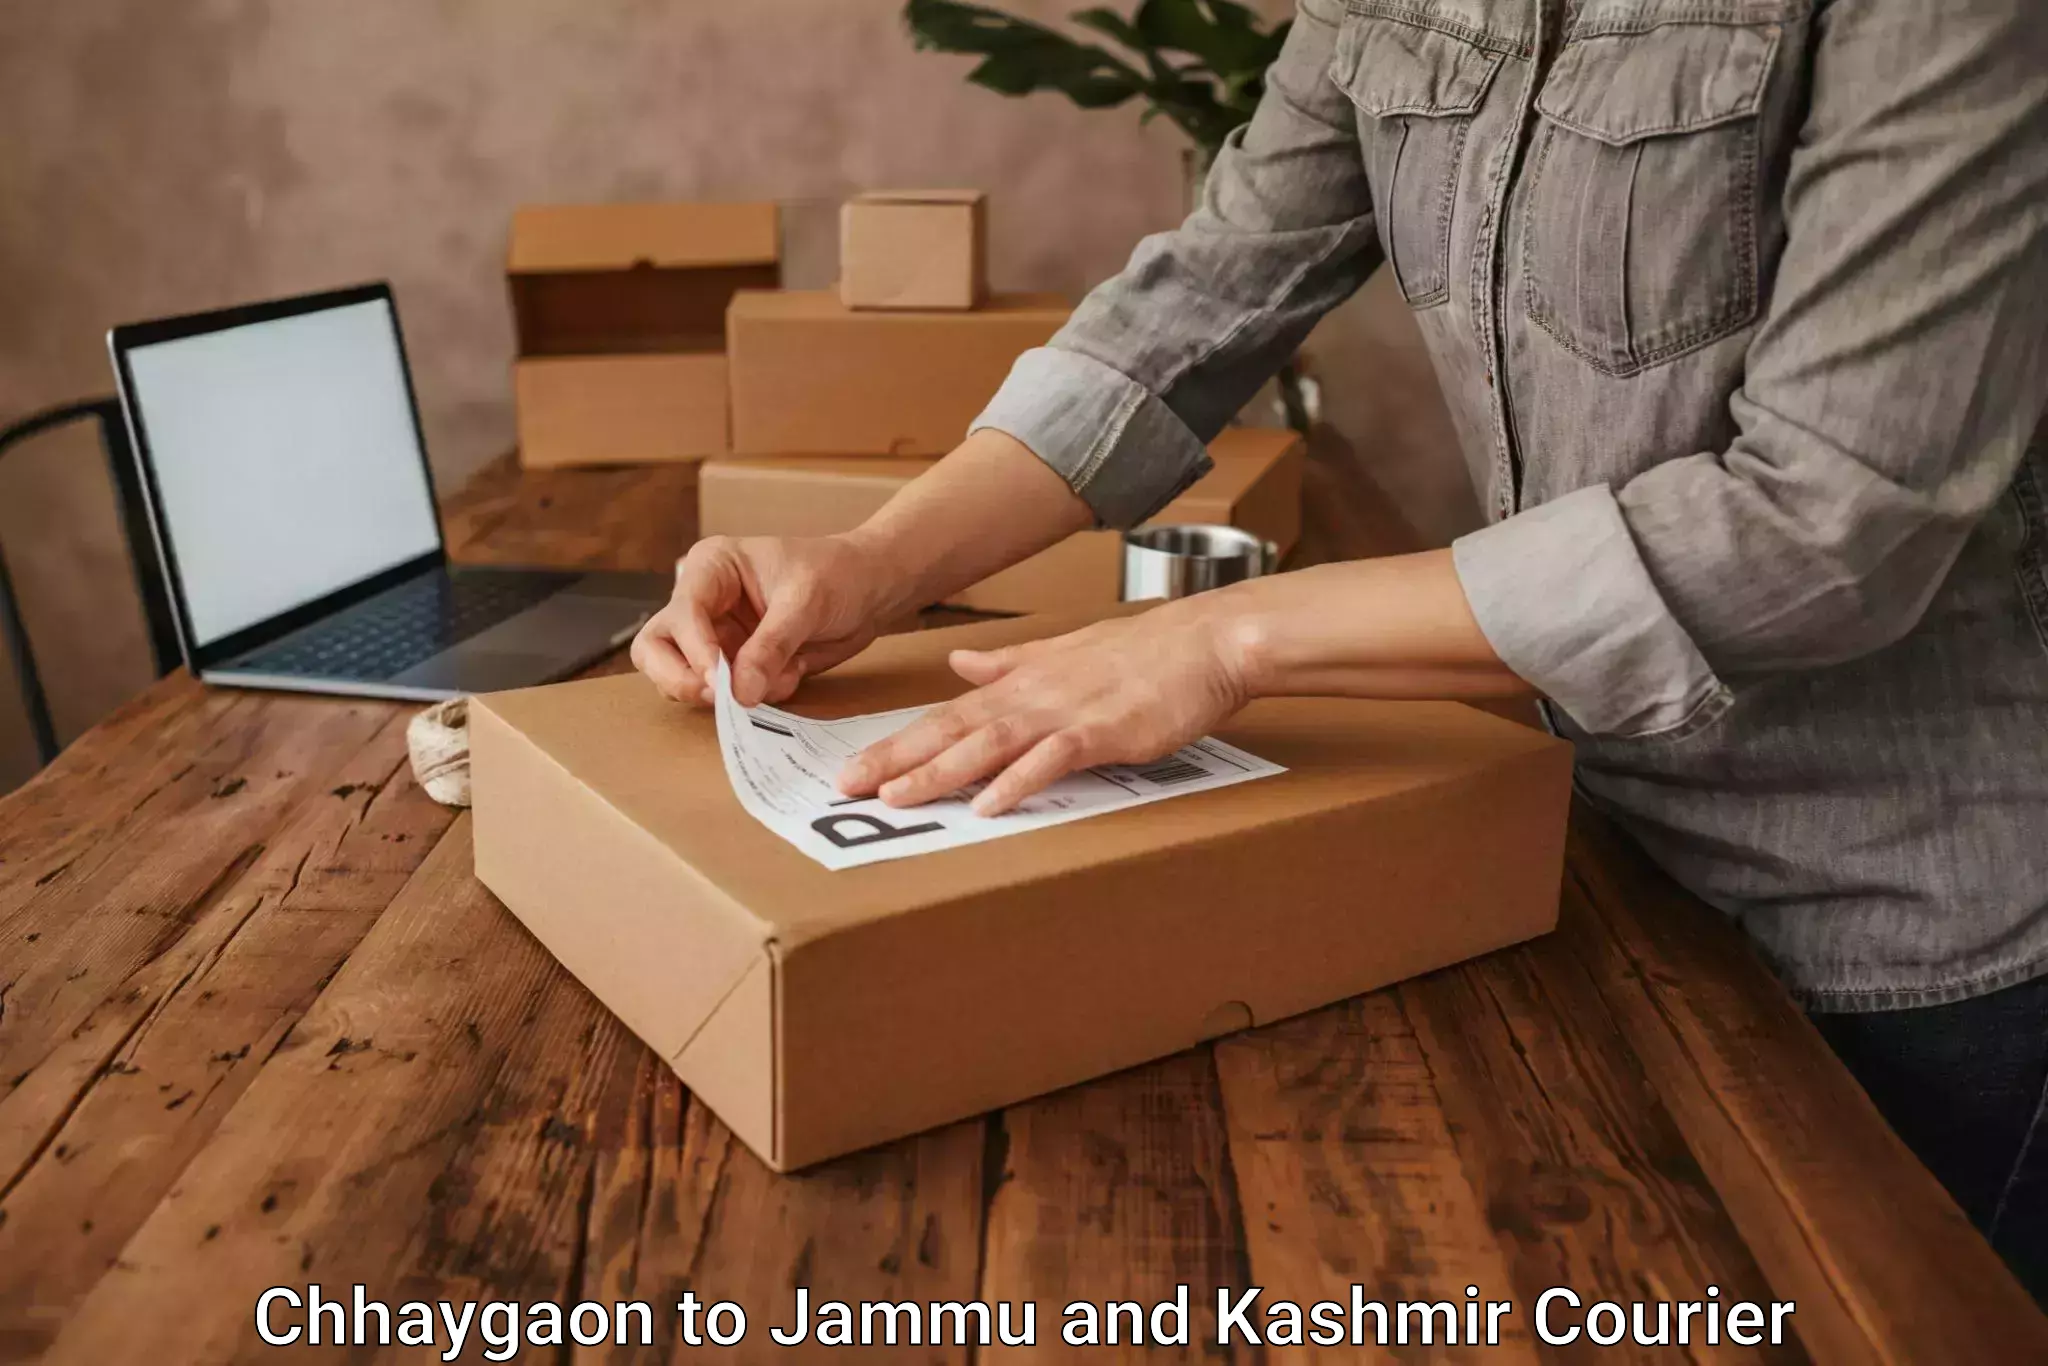 Trackable shipping service Chhaygaon to Pulwama